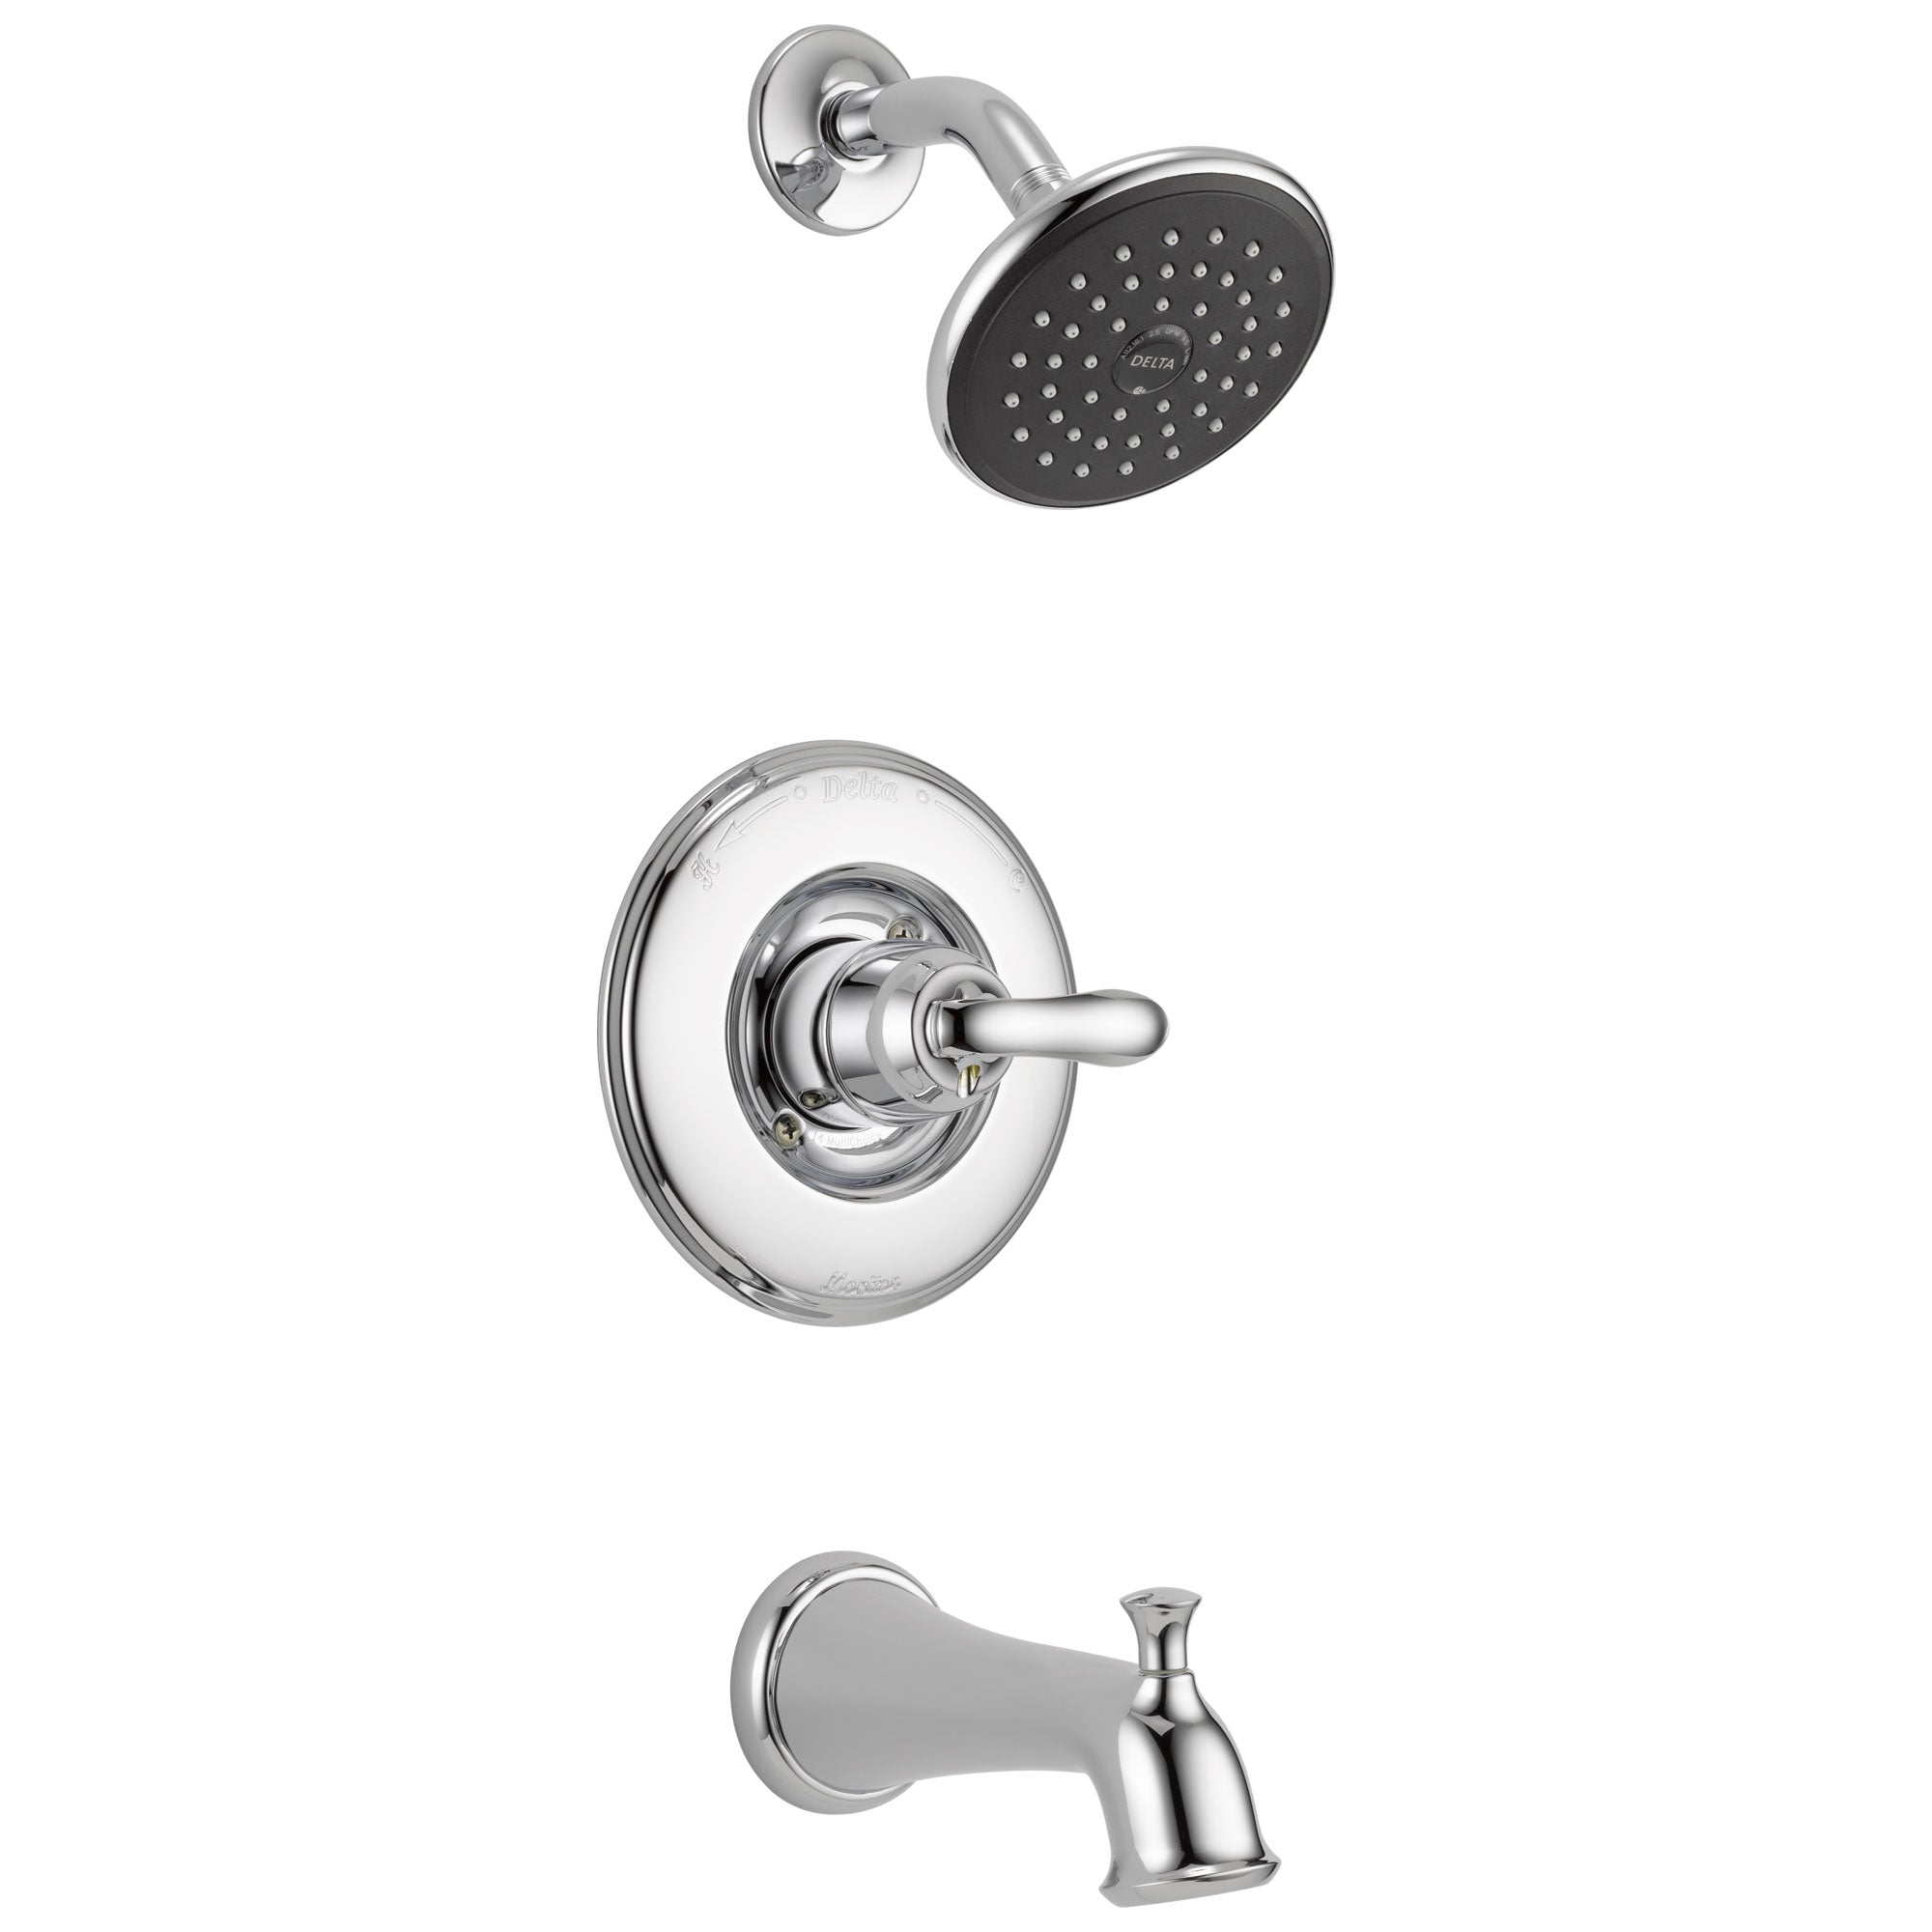 Delta Linden Collection Chrome Finish Monitor 14 Series Tub and Shower Combo Faucet Trim Kit (Requires Valve) DT14494SOS